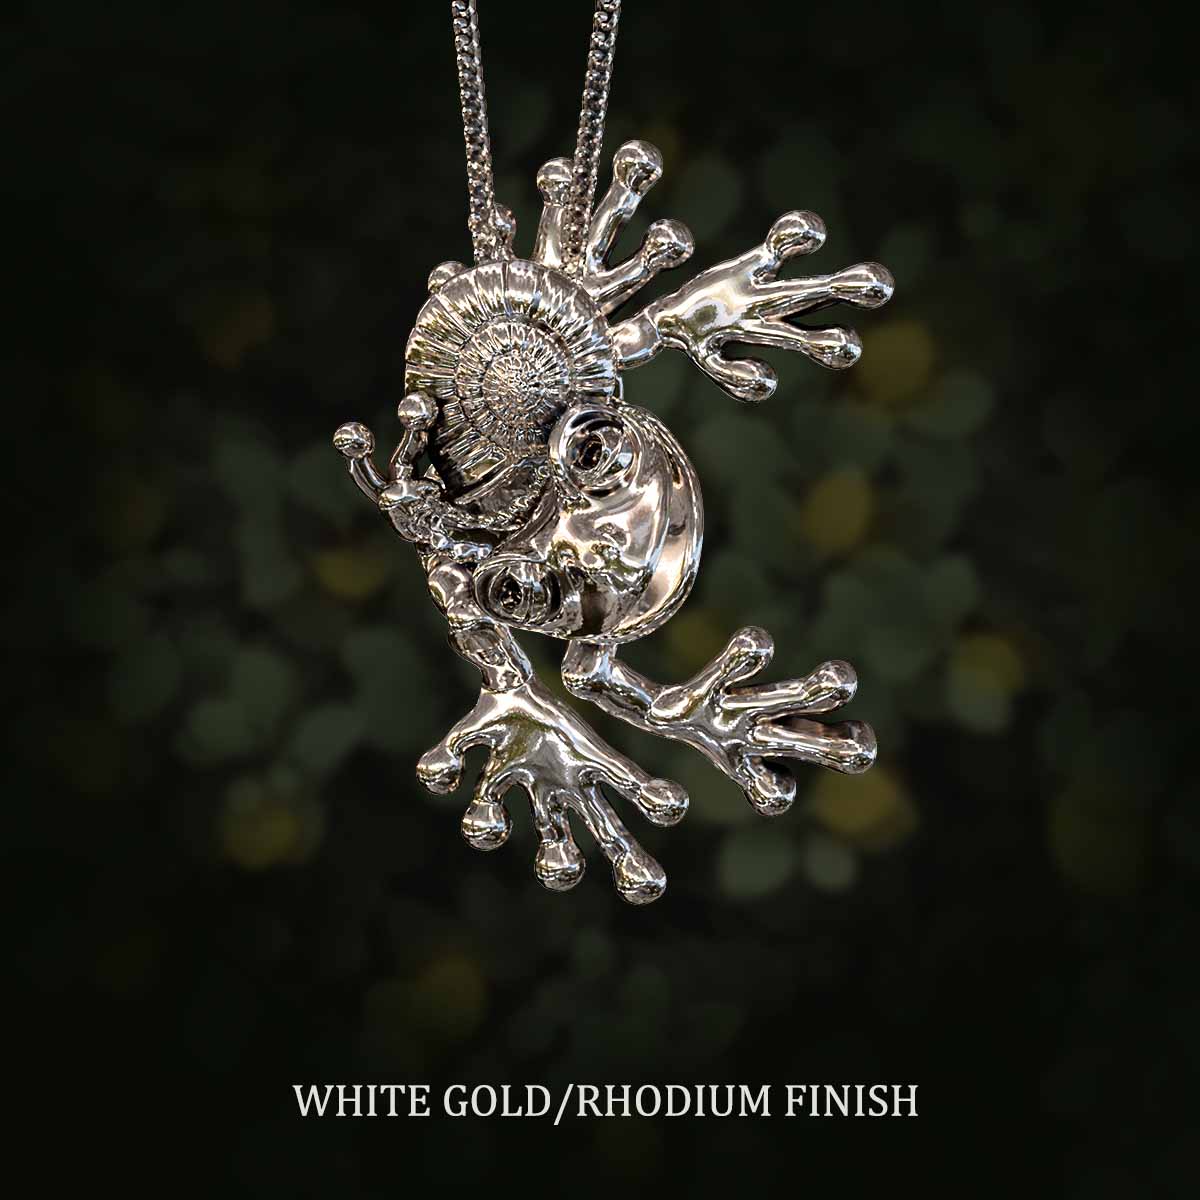     White-Gold-Rhodium-Finish-Snail-On-a-Frog-Pendant-Jewelry-For-Necklace